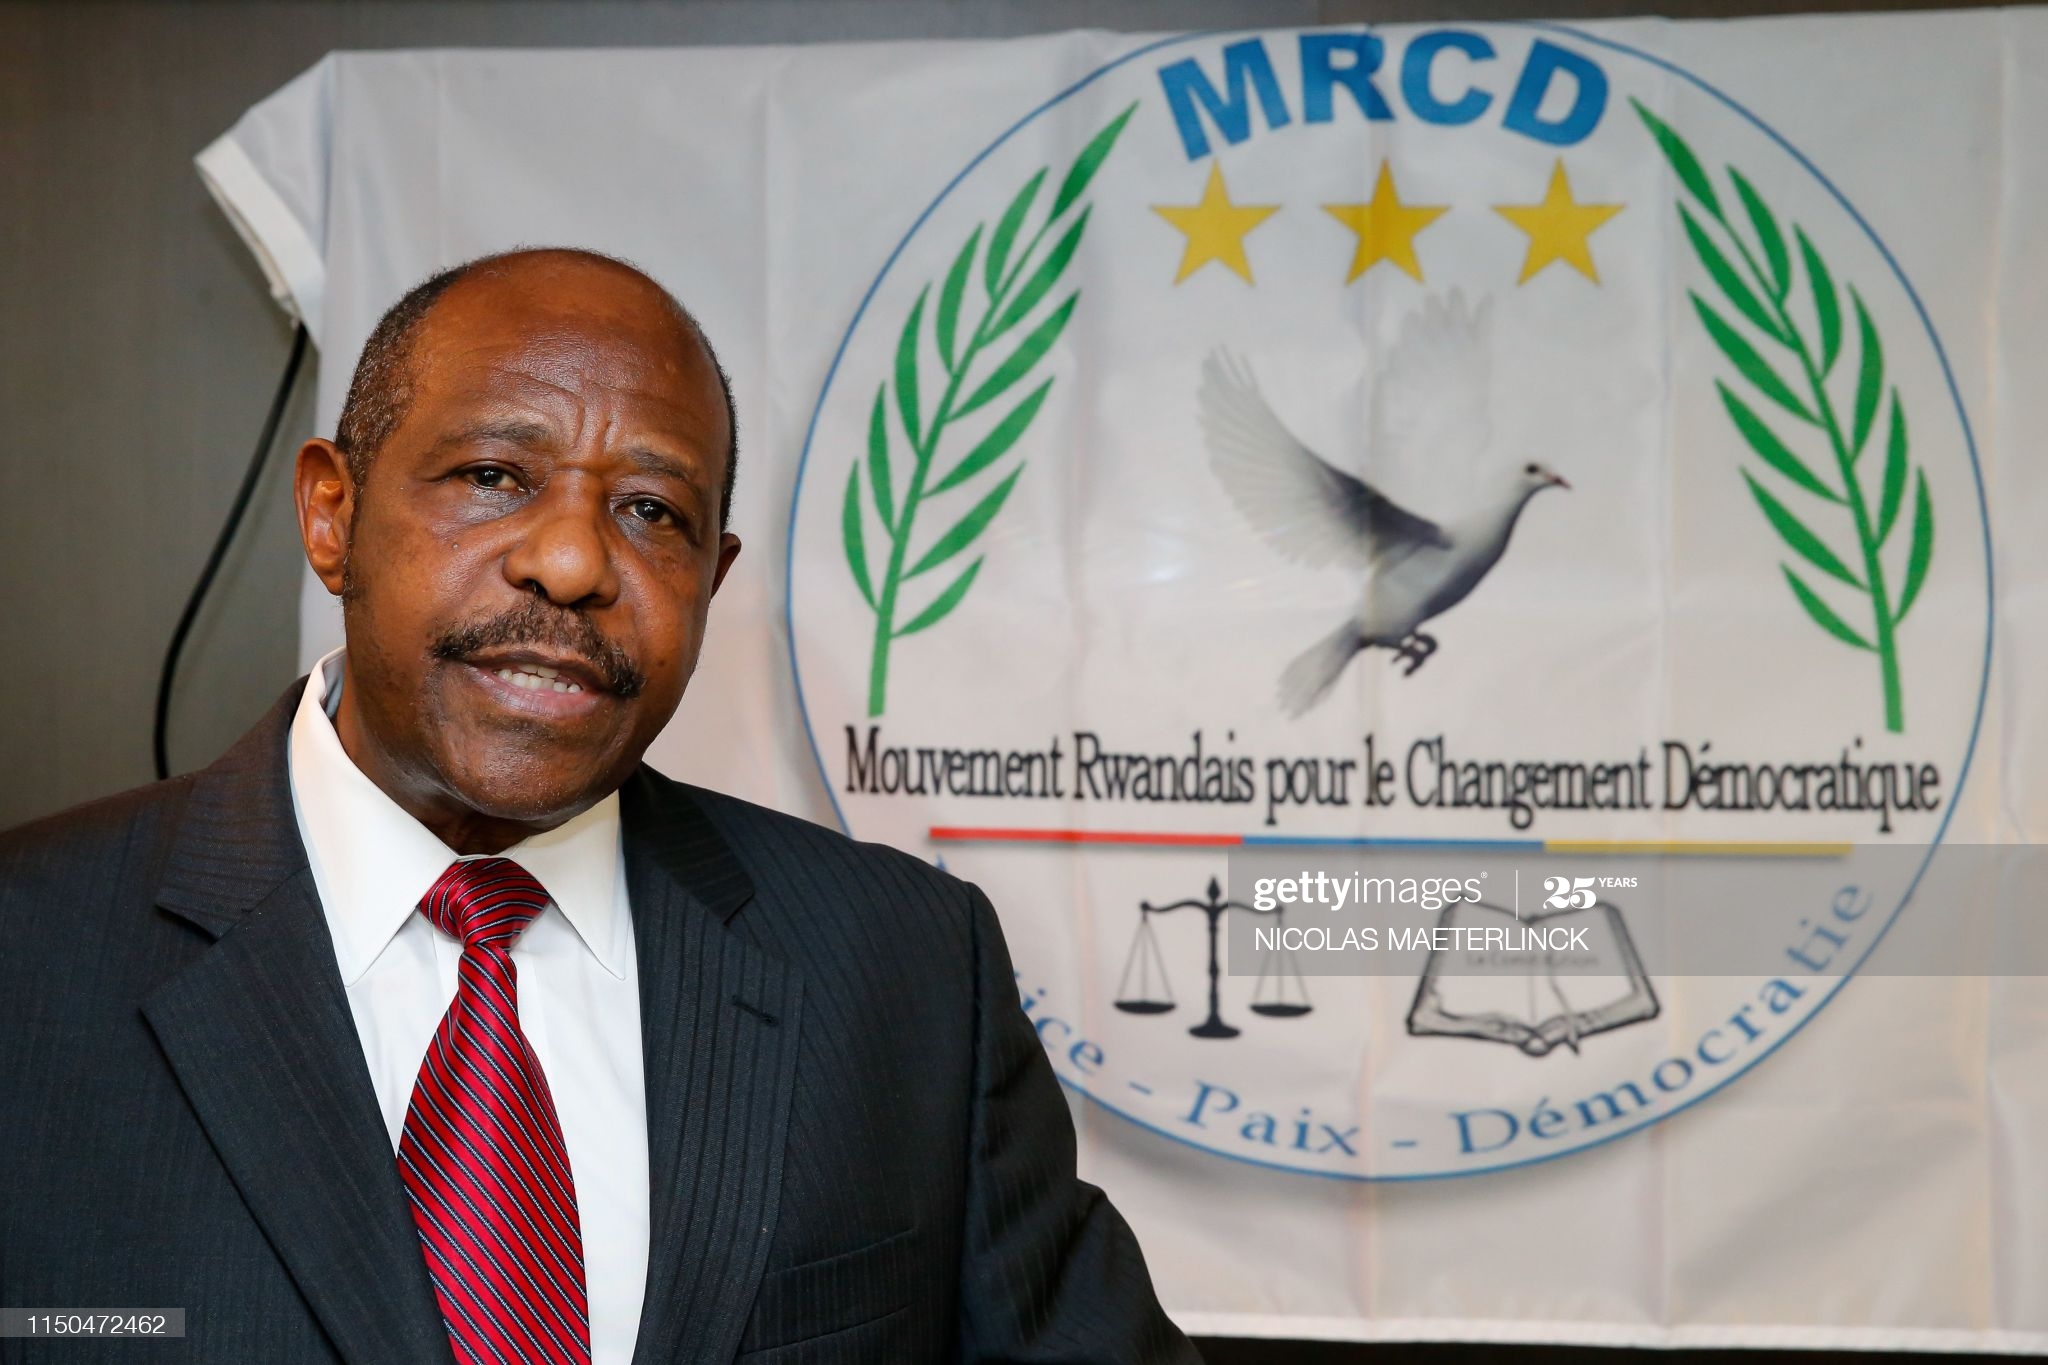 Rwandan Movement for Democratic Change (MRCD) MRCD-UBUMWE chairman Paul Rusesabagina speaks during a press conference of the political platform MRCD-UBUMWE and the political party RDI-EWANDA RWIZA, concerning the political and security situation in Rwanda, in Brussels, on June 18, 2019. (Photo by NICOLAS MAETERLINCK / various sources / AFP) / Belgium OUT (Photo credit should read NICOLAS MAETERLINCK/AFP via Getty Images)